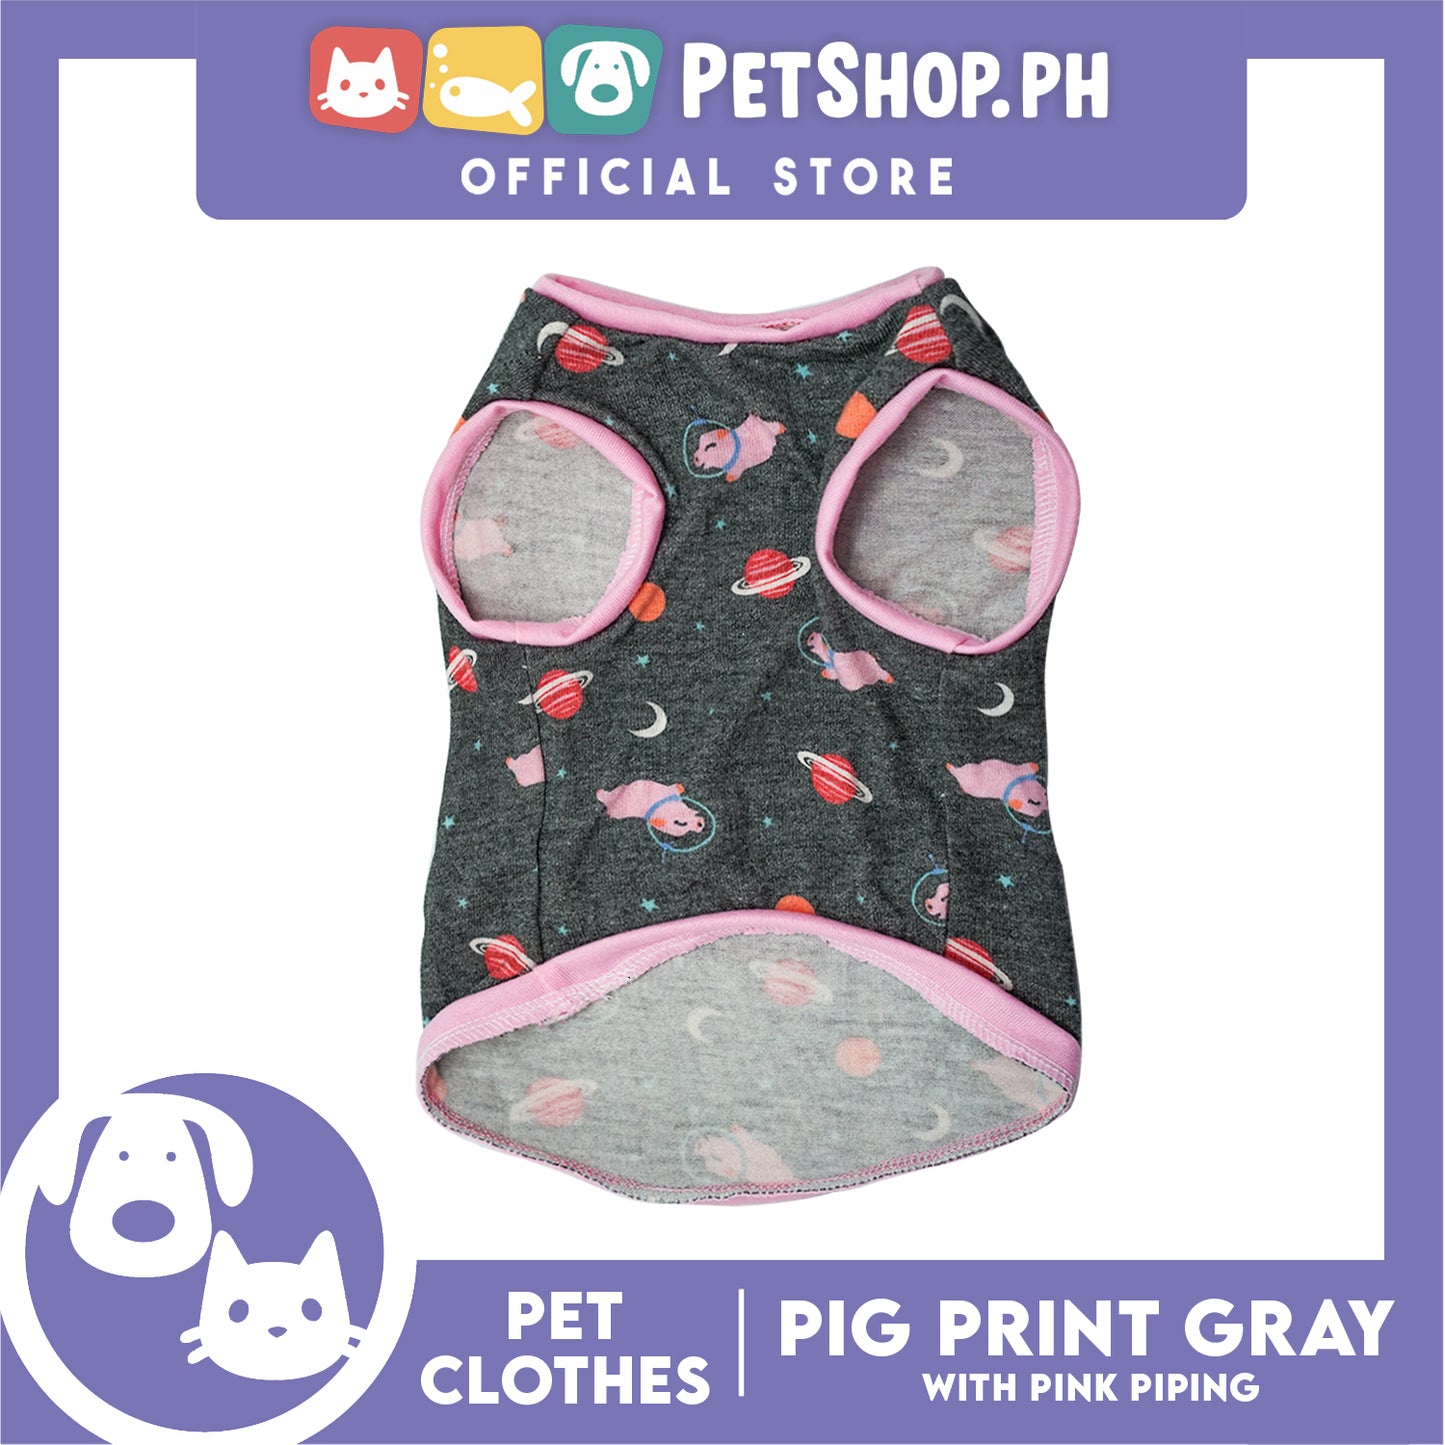 Gray Pet Sando (Large) Pink Line Pig and Galaxy Design Sando Pet Shirt Dress for Puppy, Small Dog and Cats - Sando Breathable Clothes, Pet T-shirt, Sweat Shirt